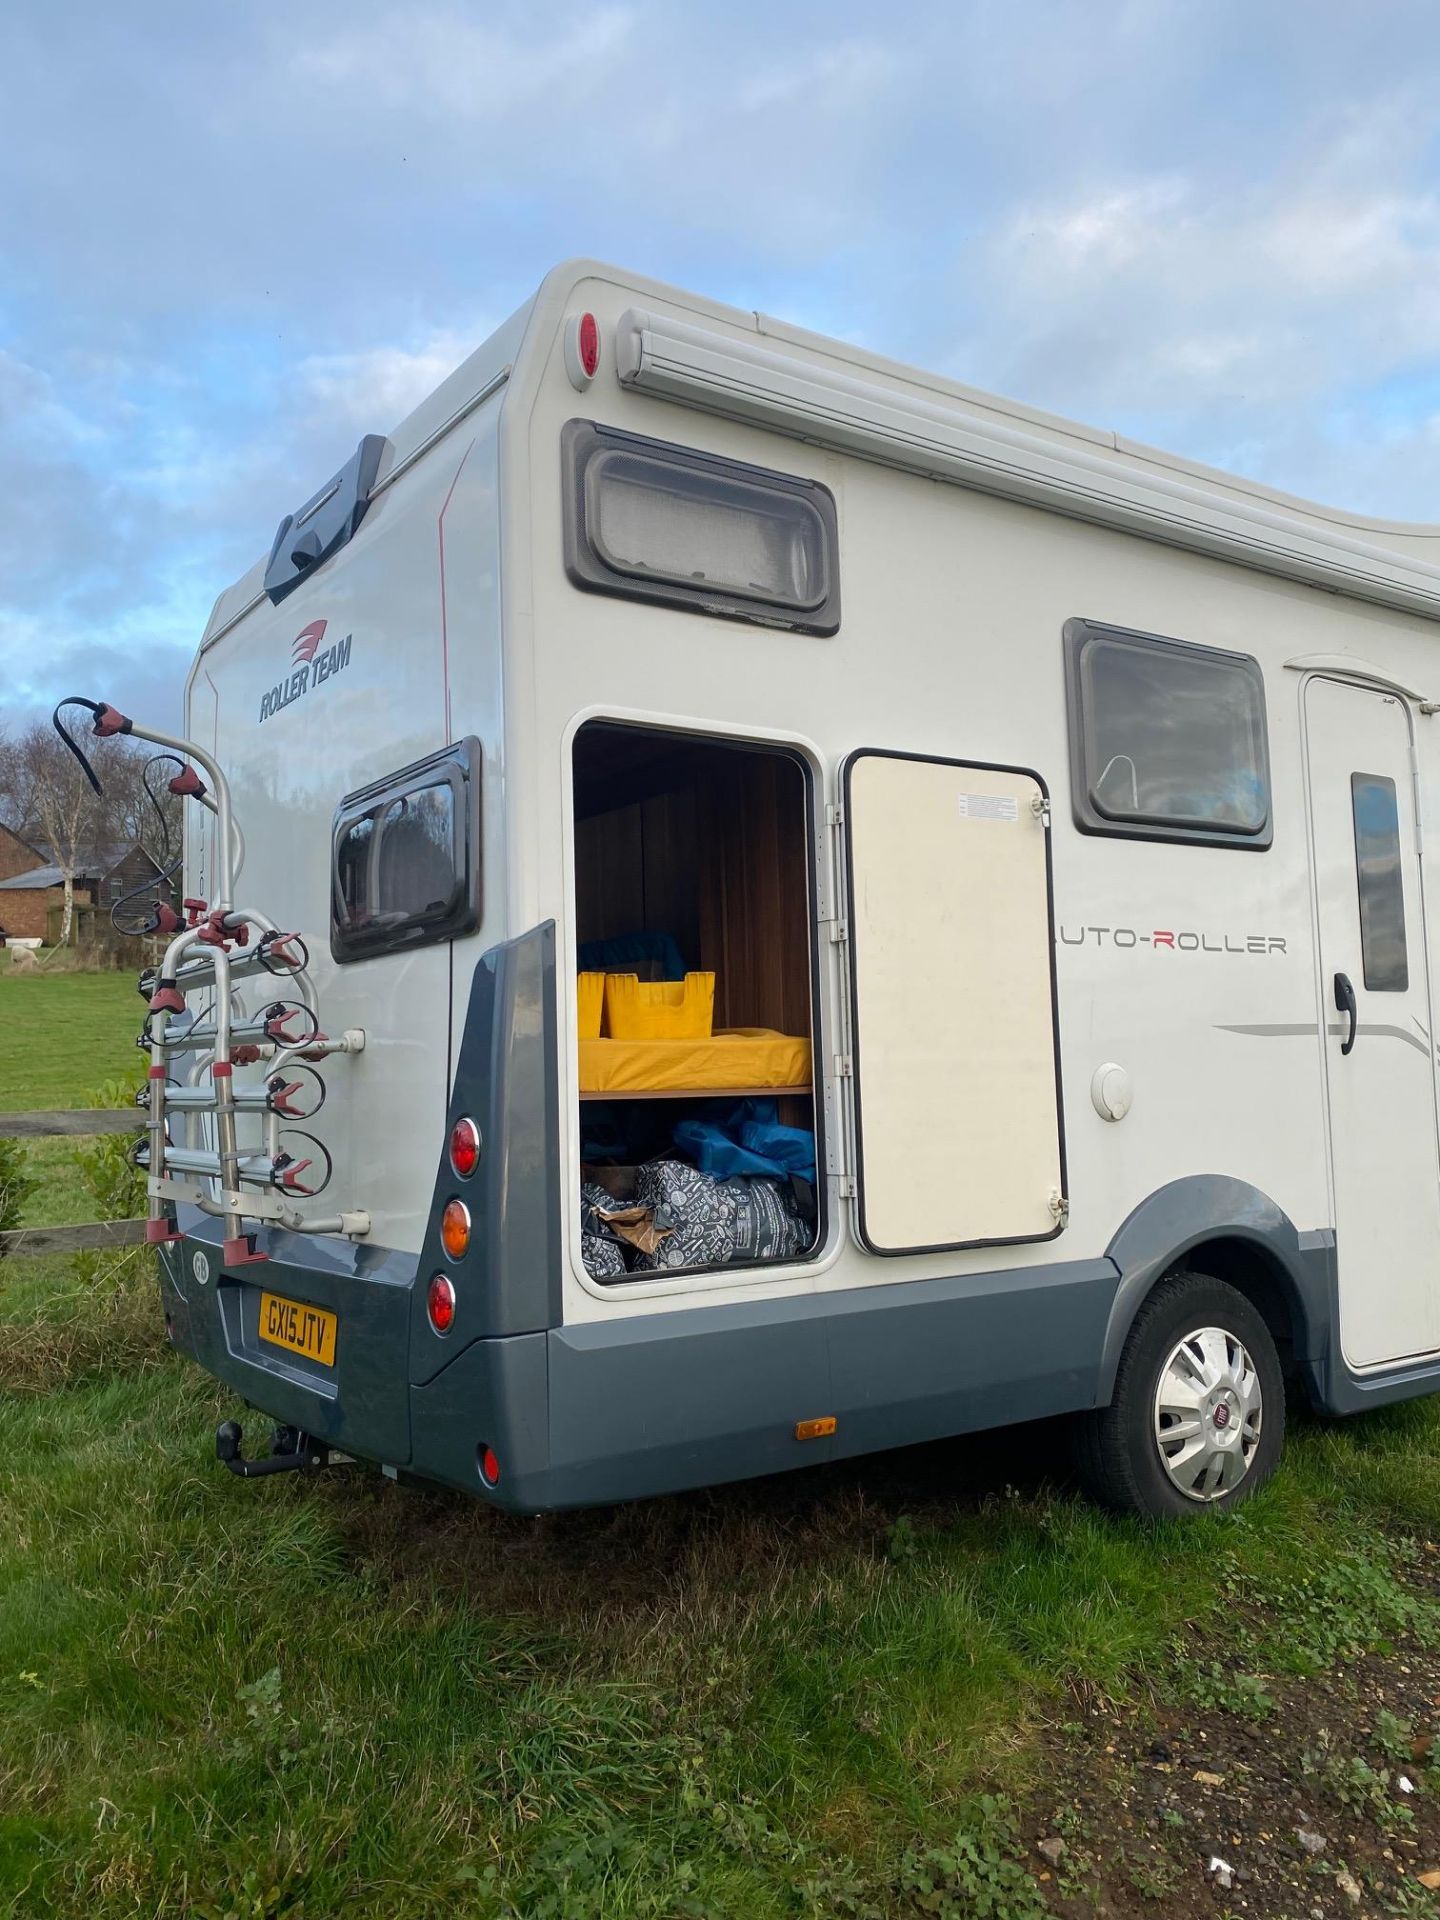 2015 FIAT ROLLERTEAM AUTO-ROLLER 707 7 BERTH MOTORHOME, 30,800 MILES, REALLY NICE CONDITION - Image 12 of 12